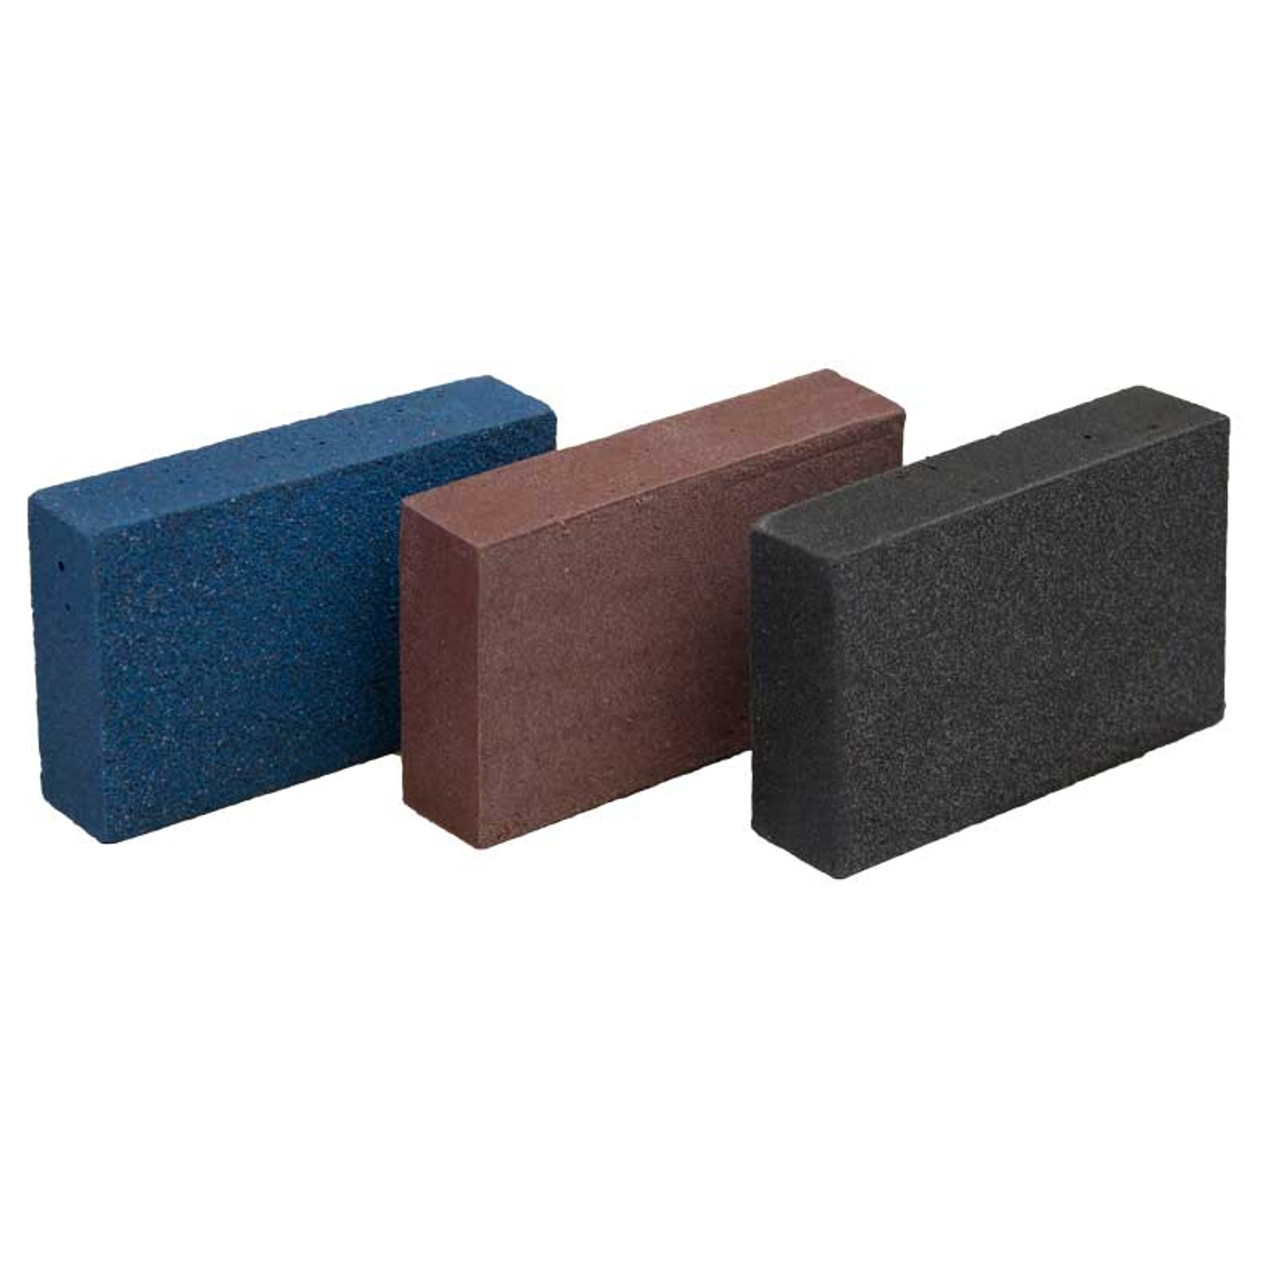 GarryFlex Rubber Abrasive Cleaning Blocks for Watch and Jewelry